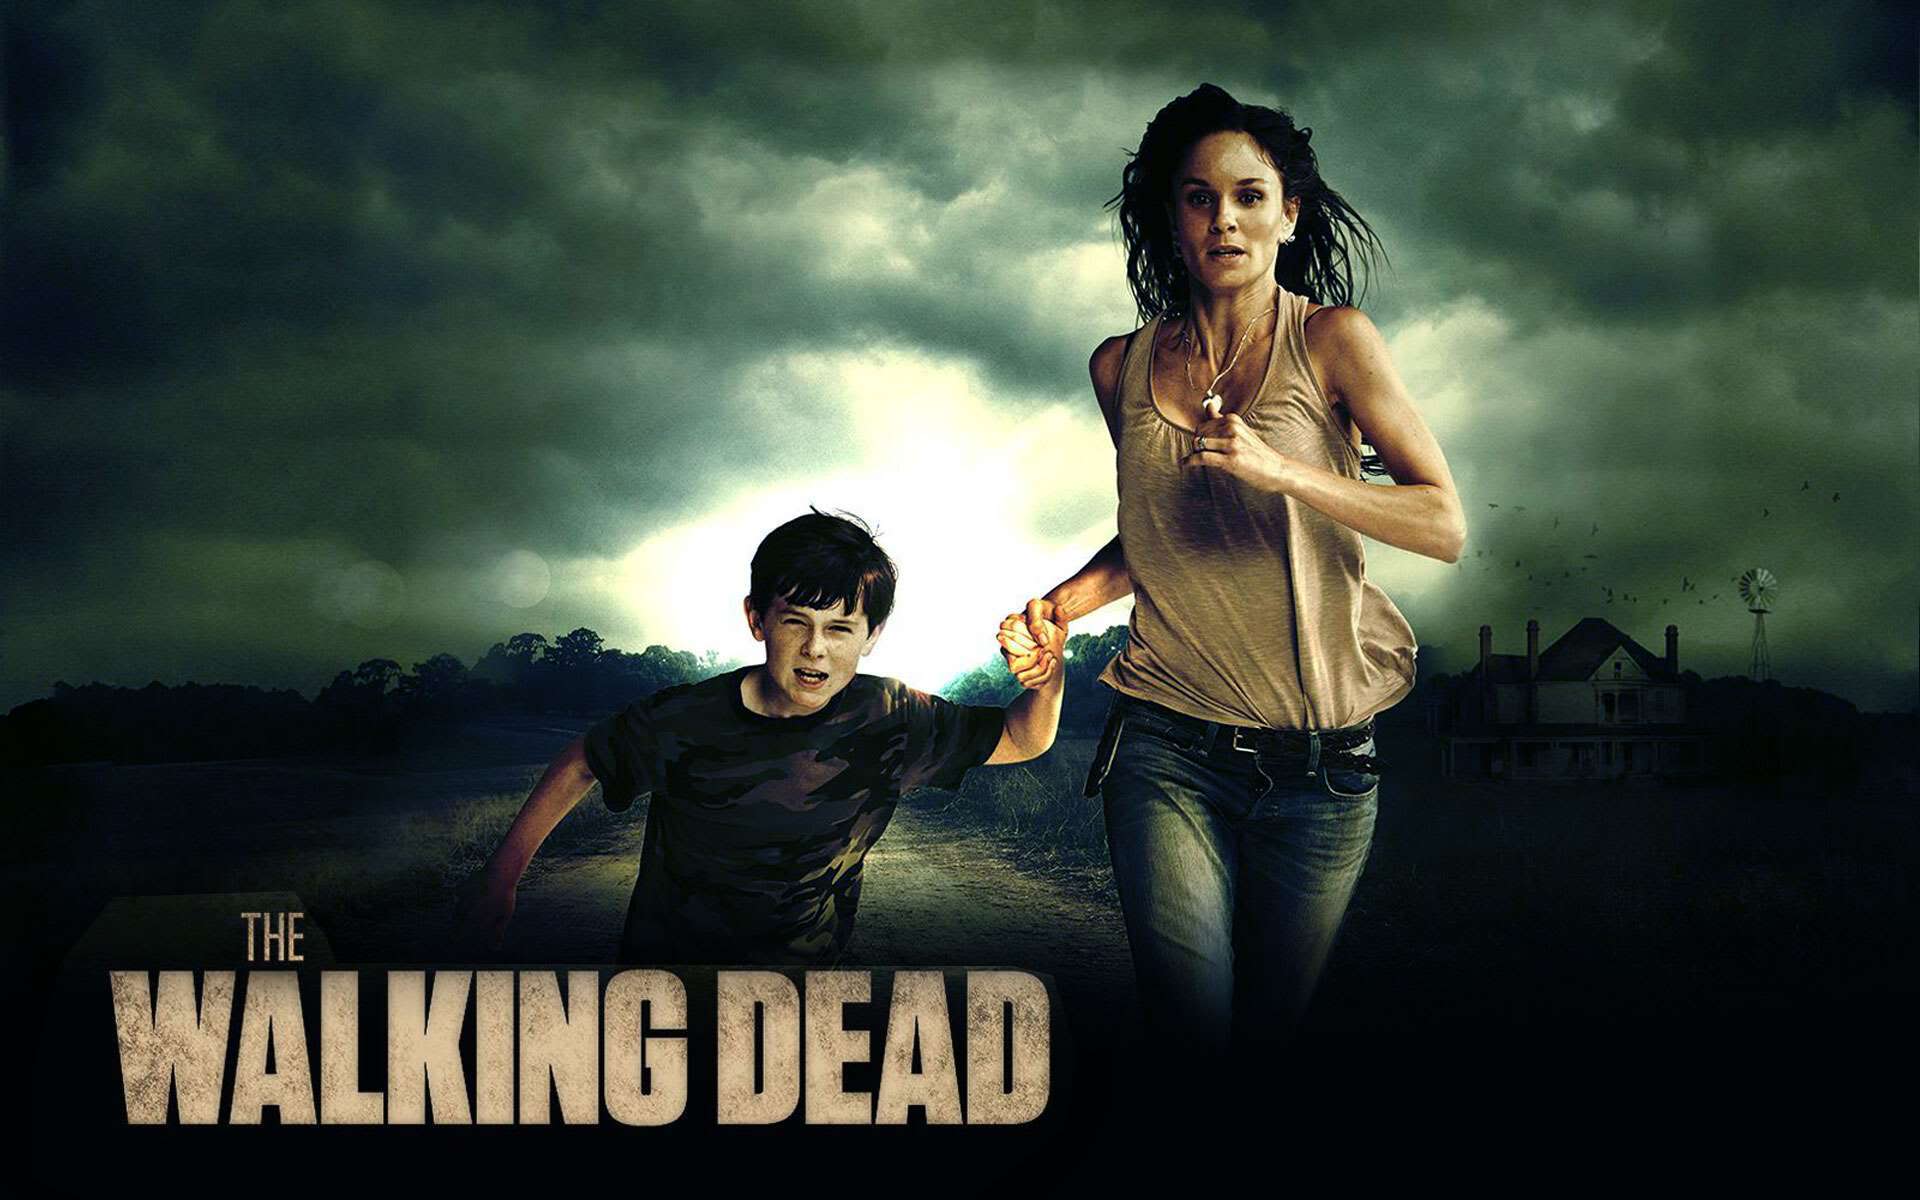 The Walking Dead Backgrounds   Wallpaper High Definition High 1920x1200